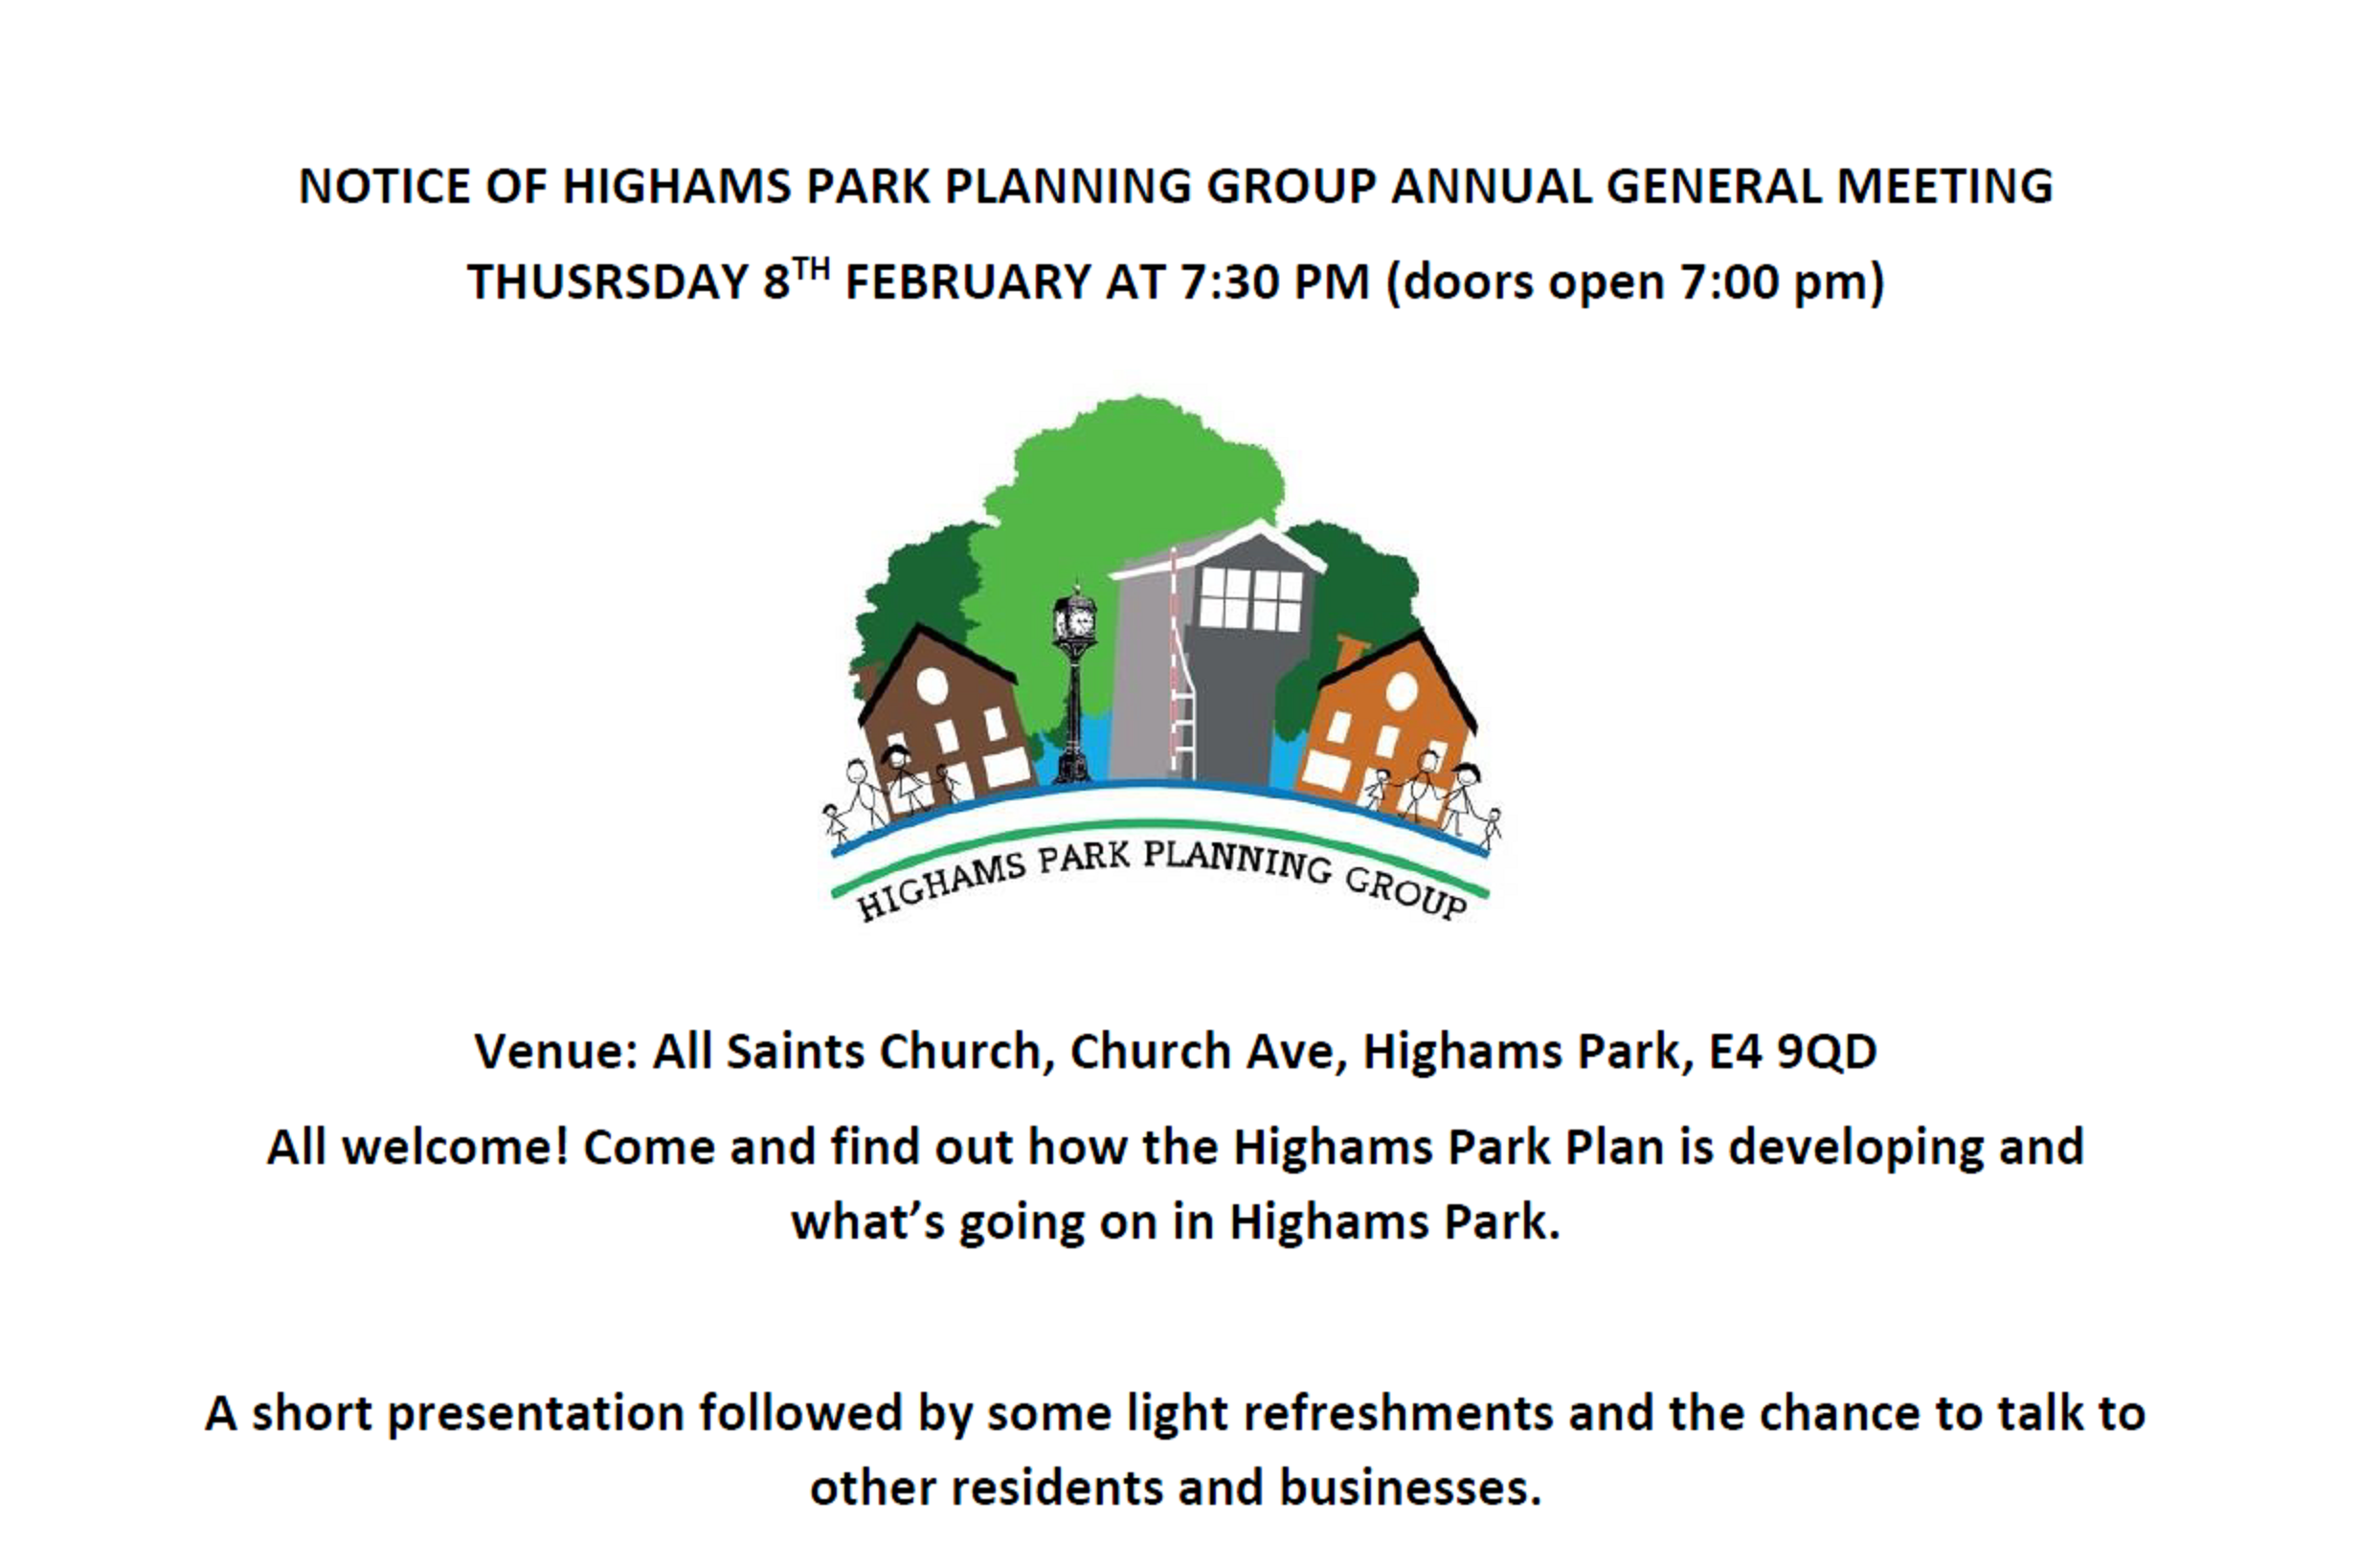 The HPPG Annual General Meeting is on 8th February  at 7:30 pm at All Saints Church E4 9QD